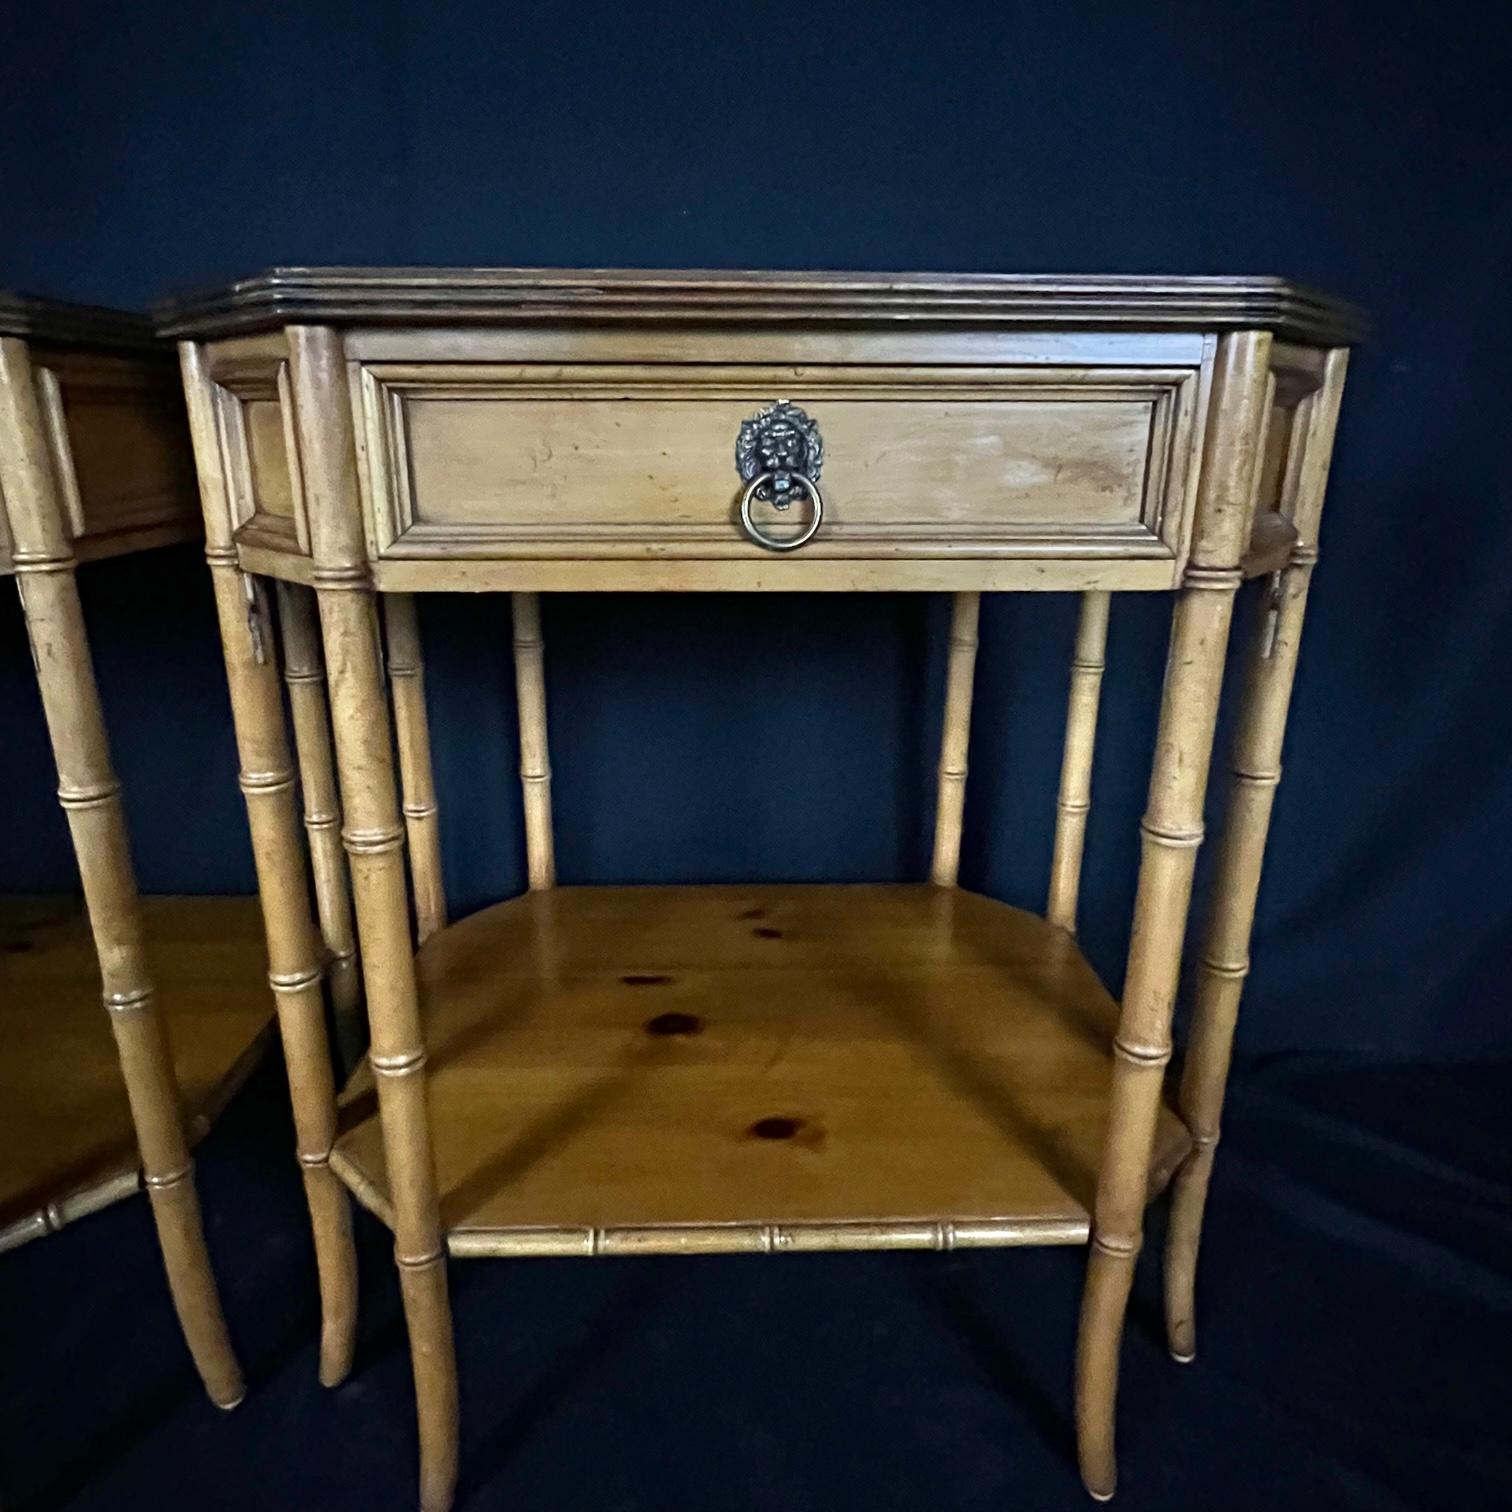 Outstanding faux bamboo side tables or night stands in maple and pine by Baker Furniture Co. Exceptional design and construction are the trademarks of Baker furniture. Finely detailed bamboo style legs are accented by the single drawer with lion